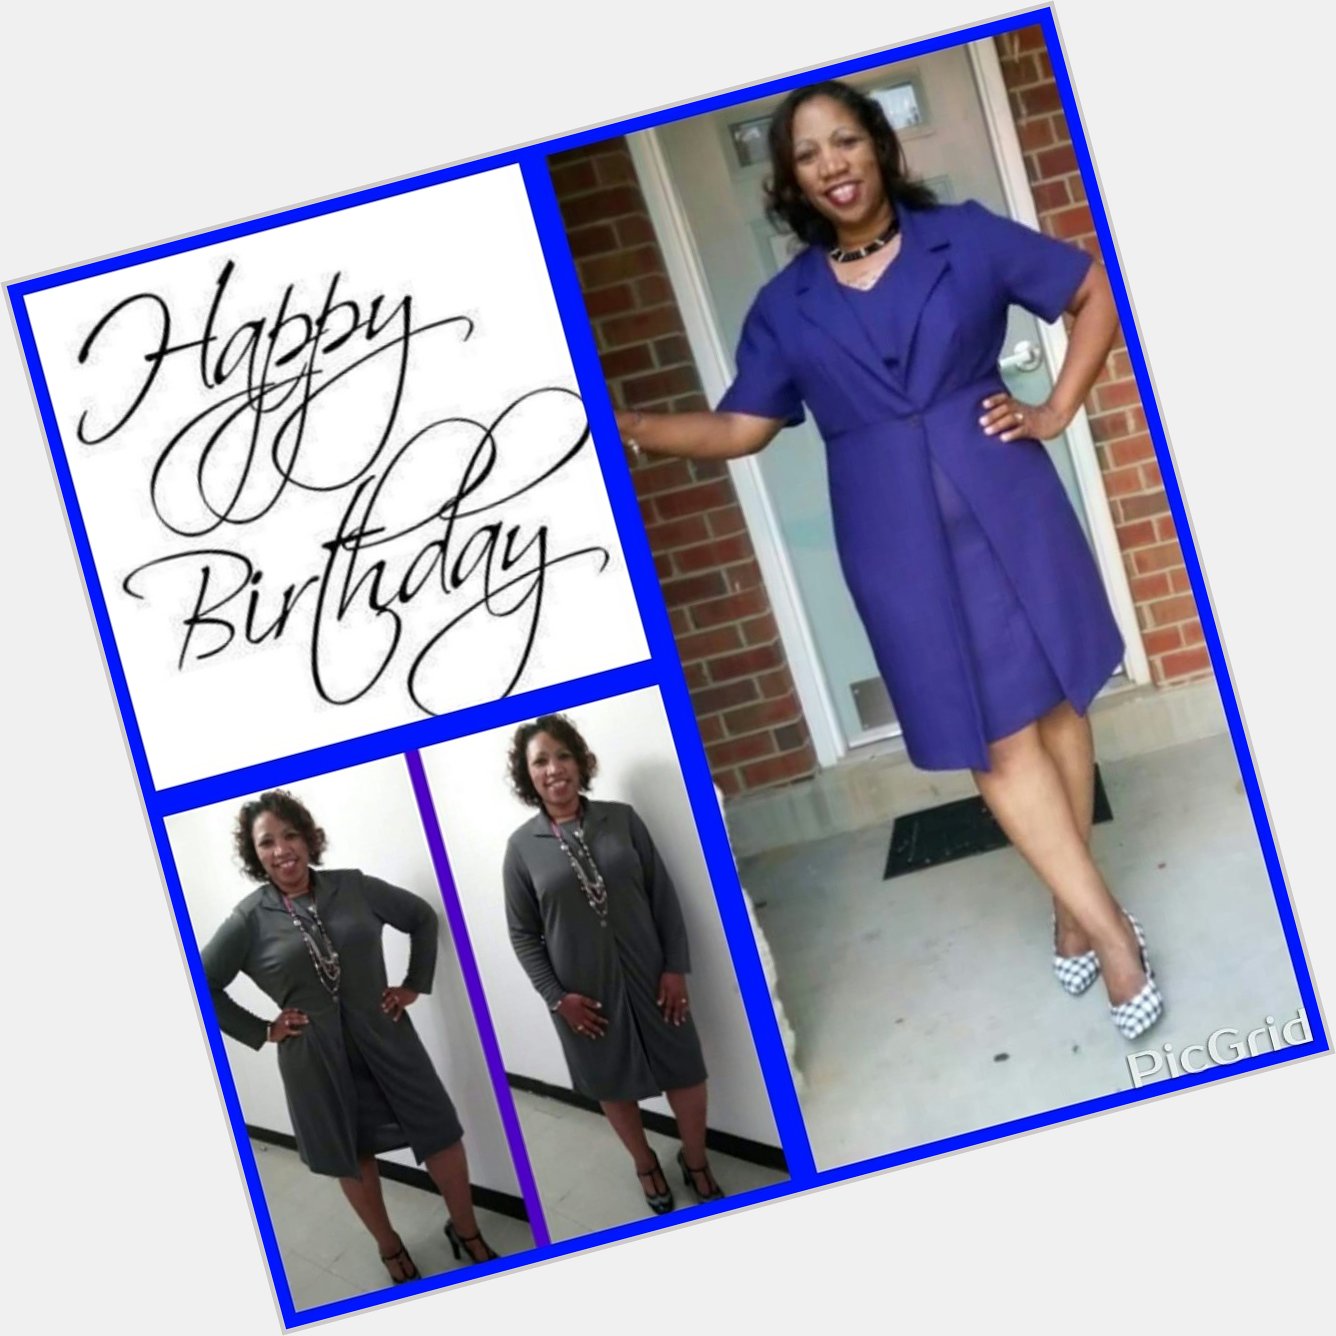 GLH Retinoschisis Foundation want to wish it\s Founder and CEO - Alicia Hall, a very Happy Birthday!! 